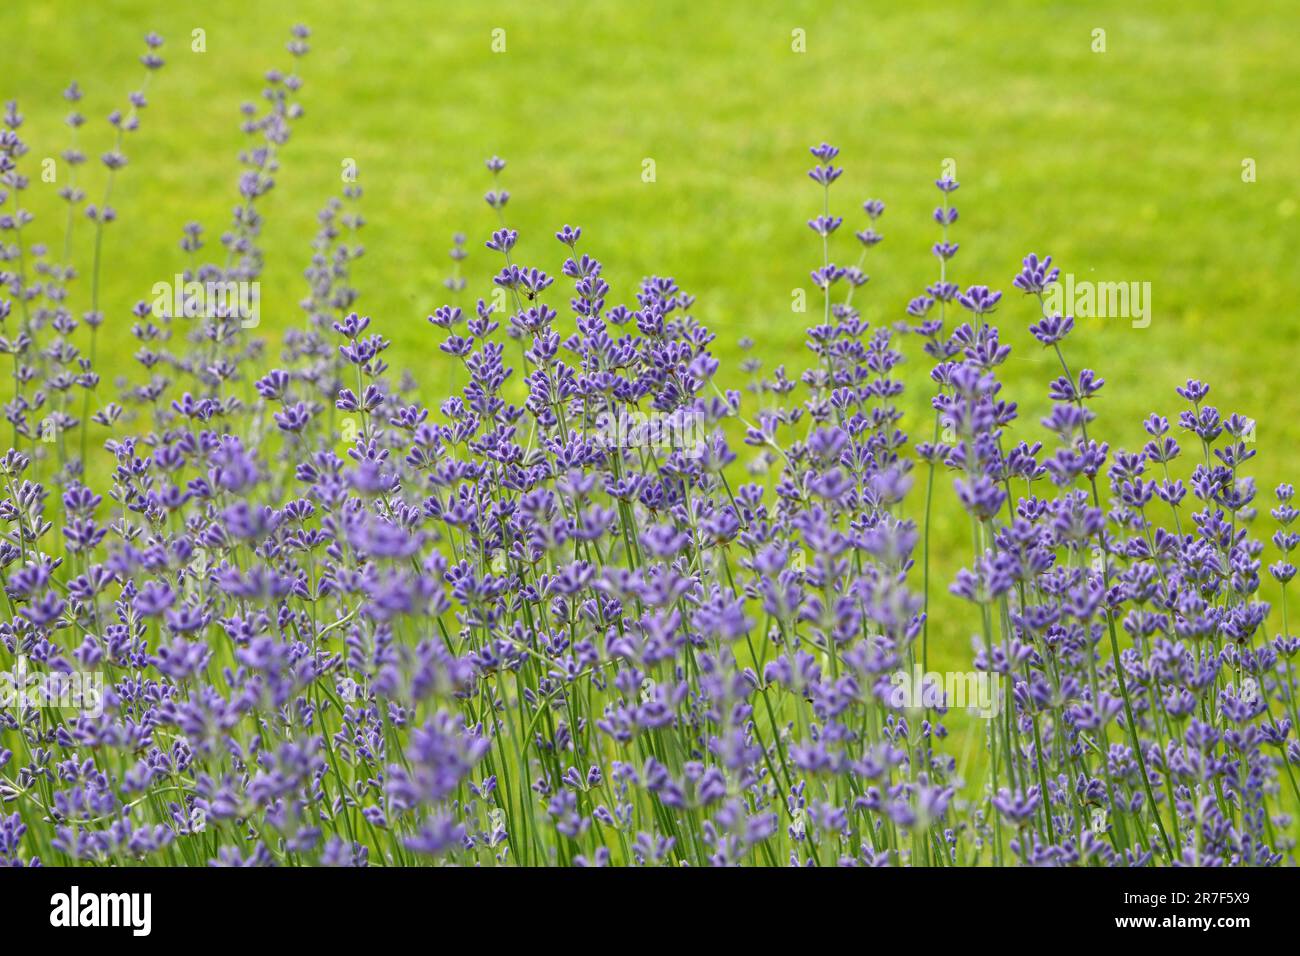 Wild Lavender. Lavender in different shades growing outside the house. Lavender. Stock Photo